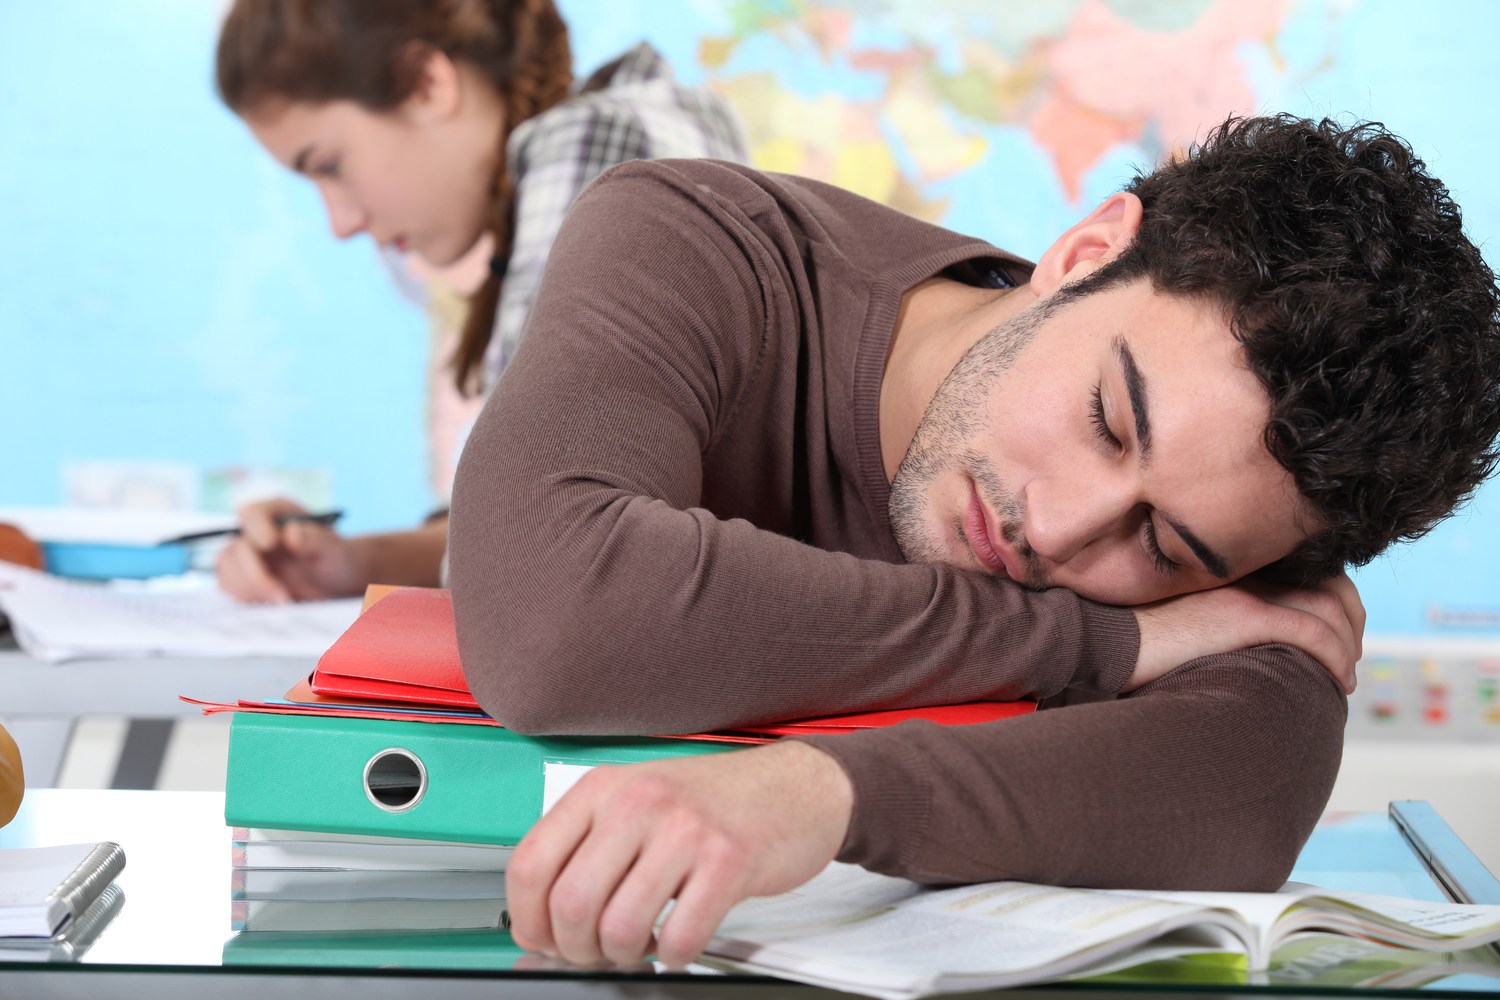 Treatment for Narcolepsy: Sleep Disorder